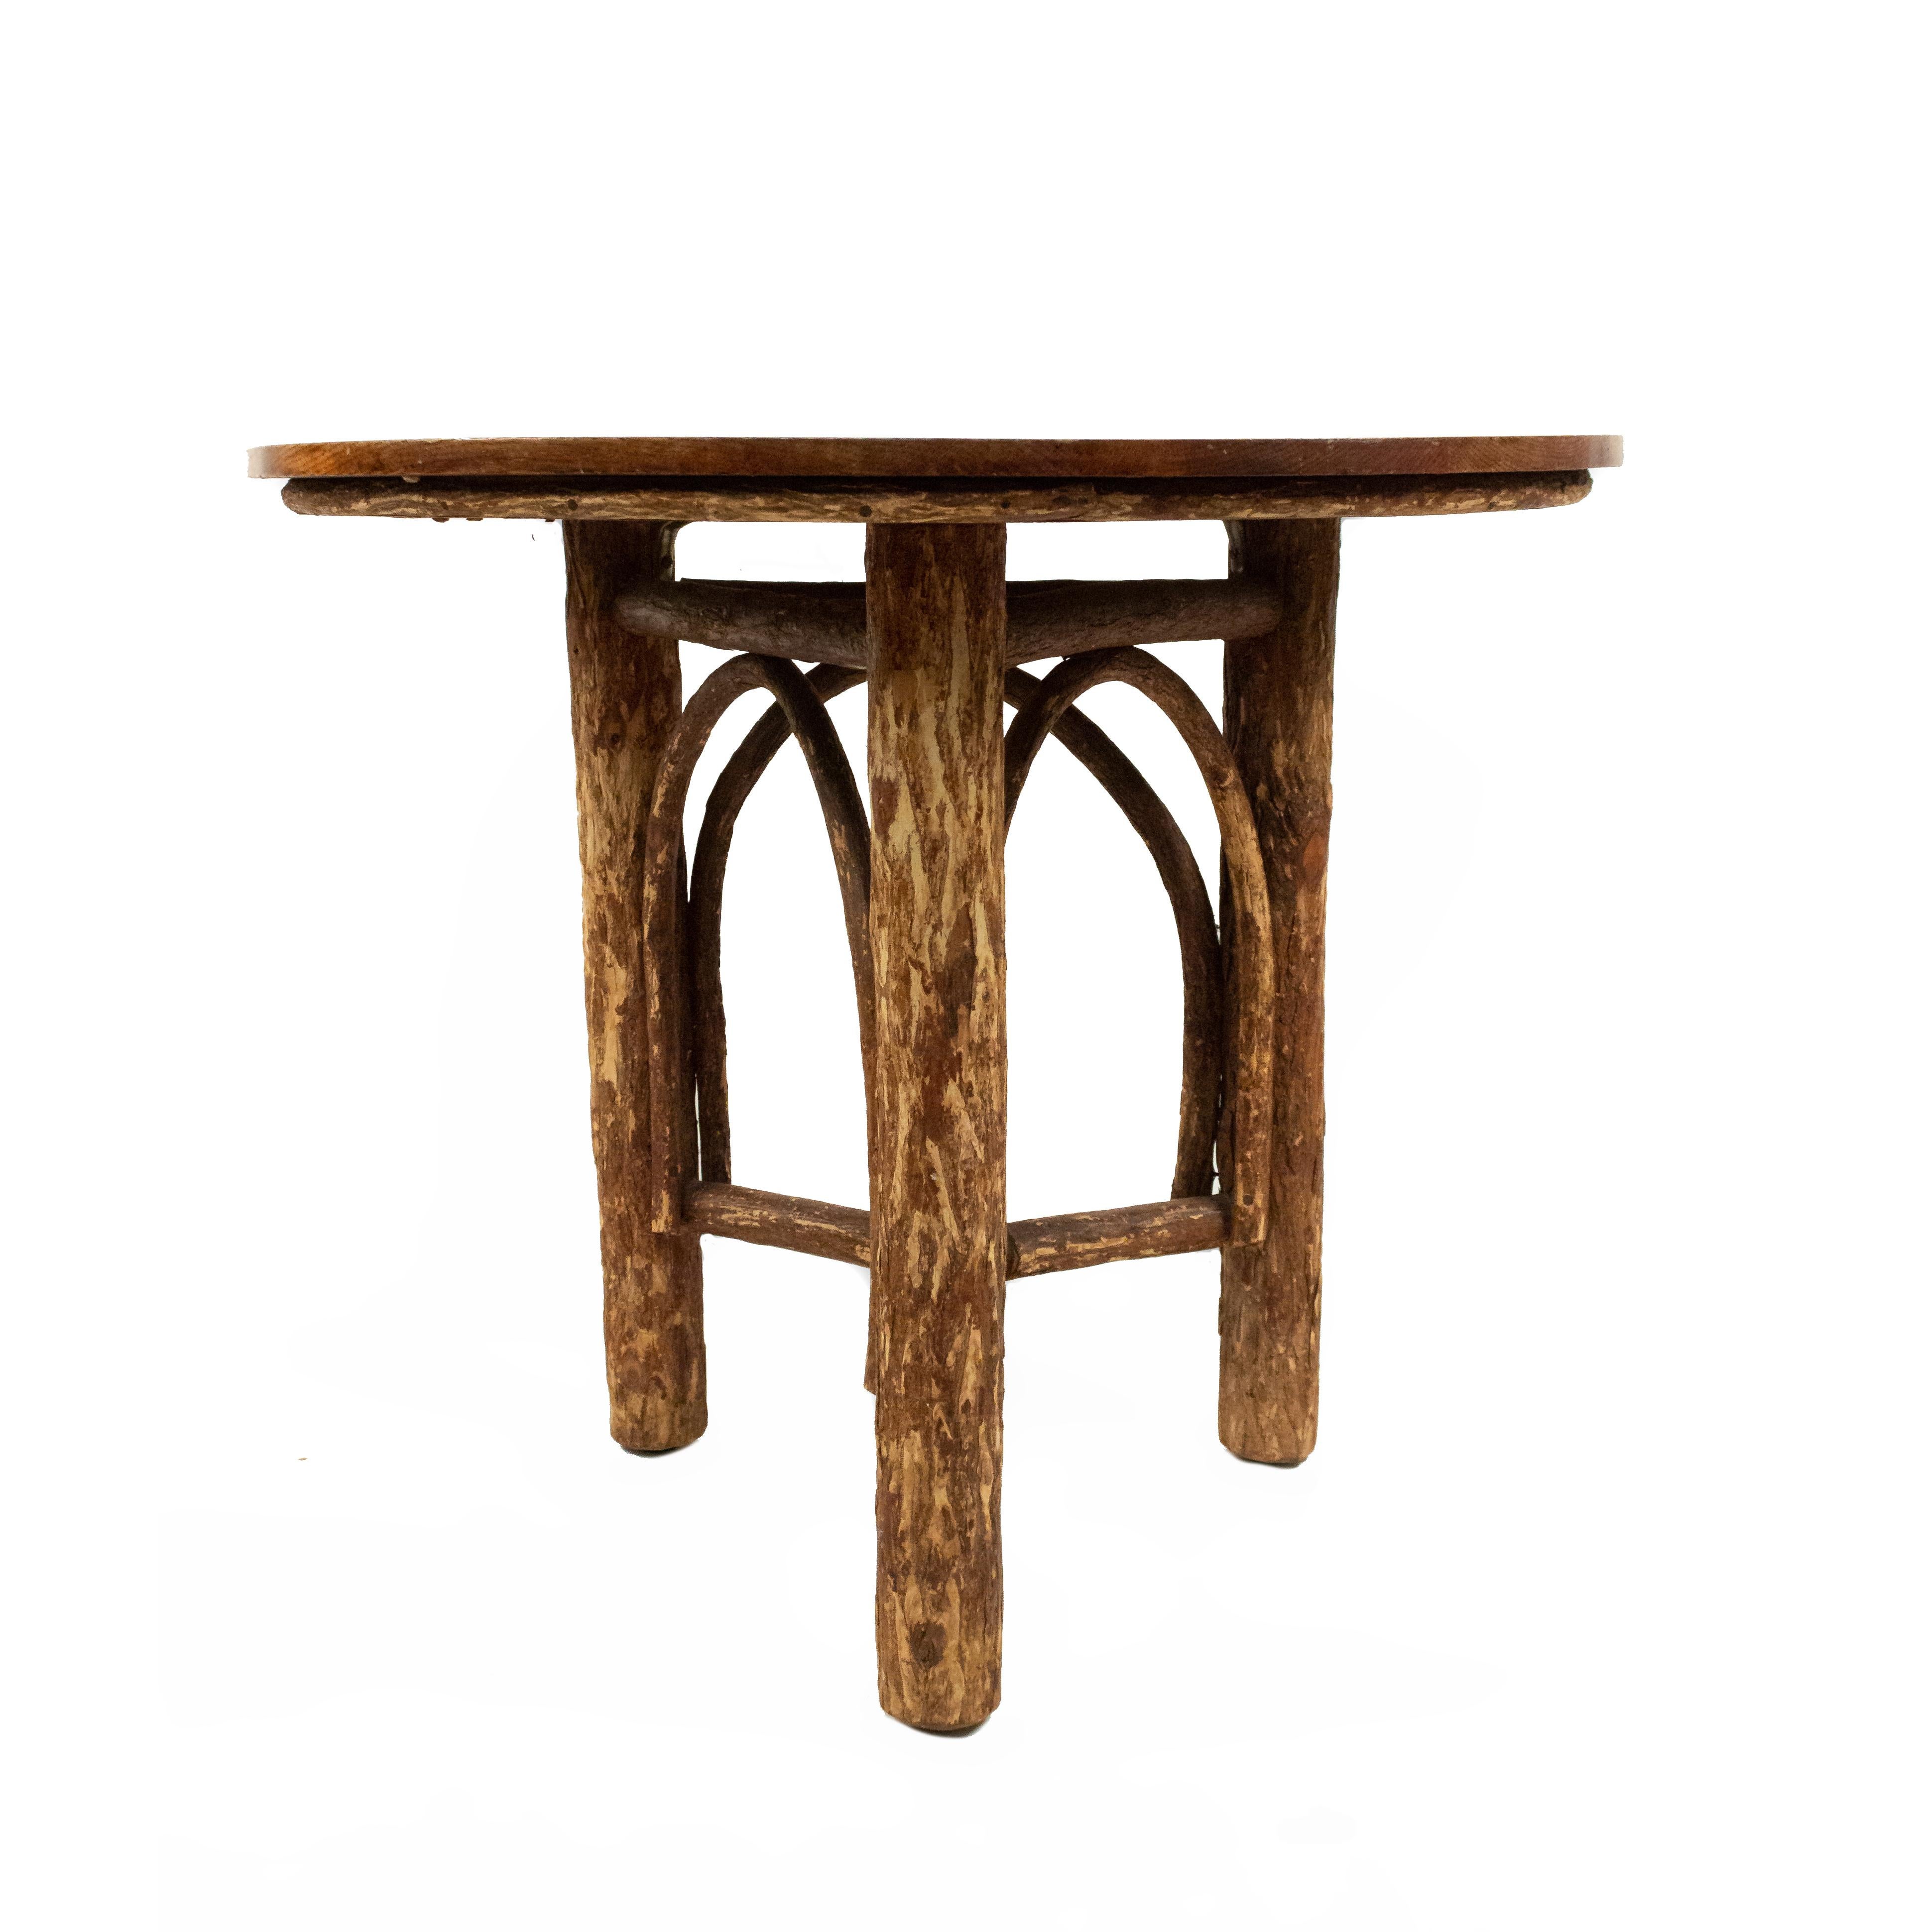 Rustic Old Hickory-style (late 20th century) round end table with exposed bark legs and bentwood details along sides with a pine top.
         